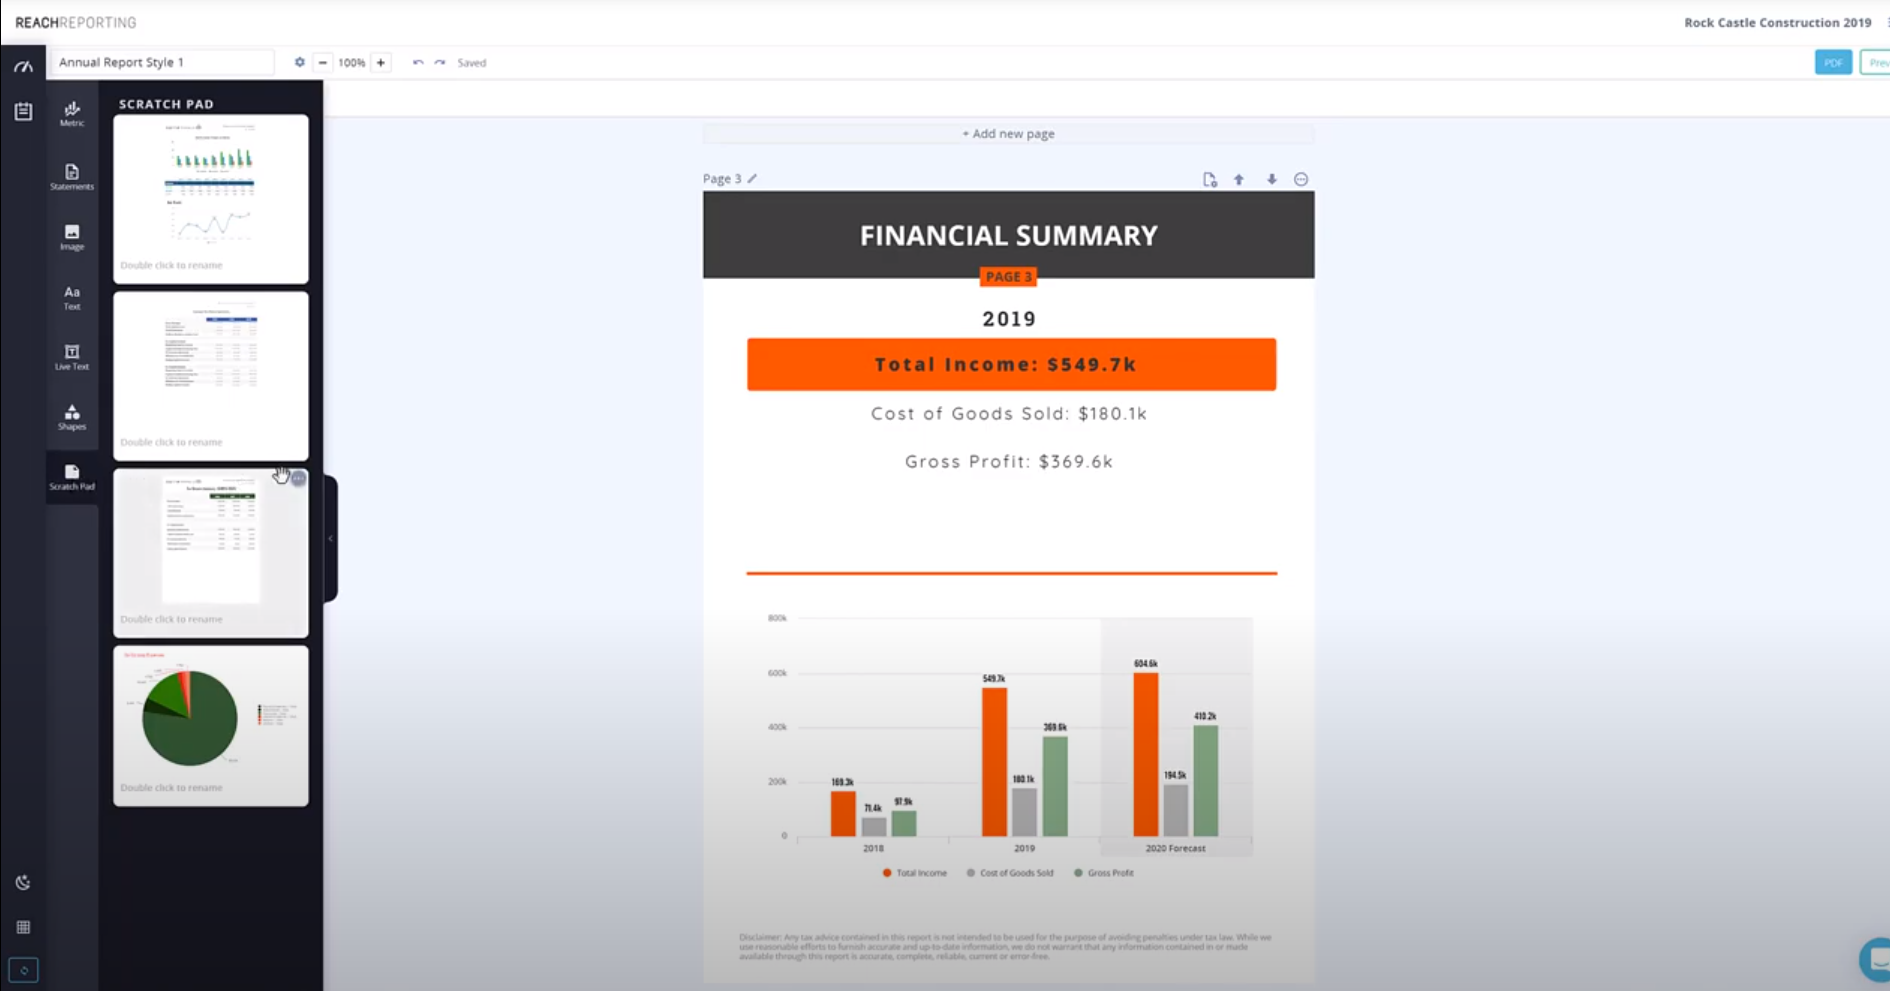 Reach Reporting financial summary